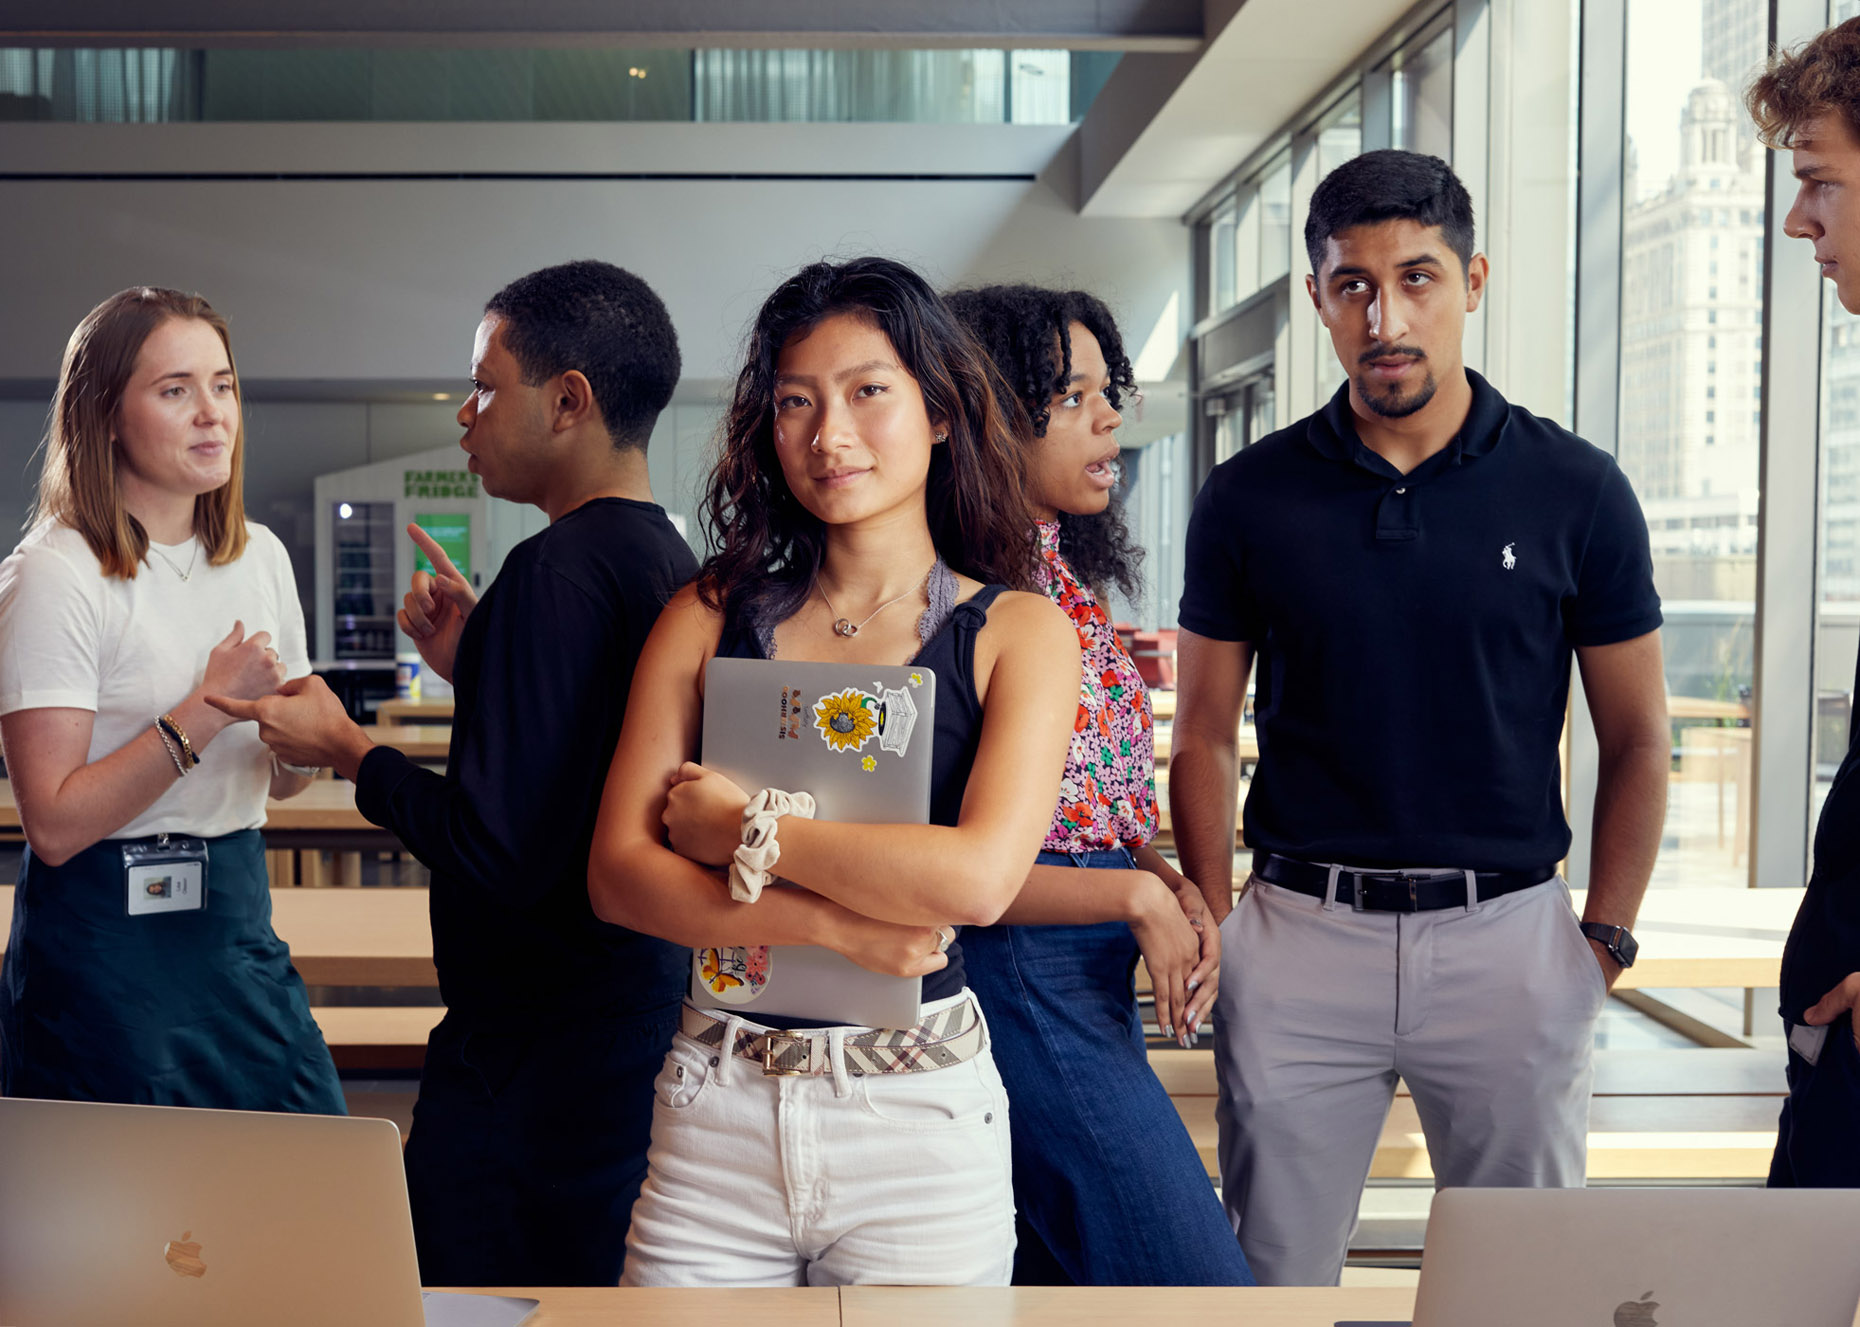 Asian student student standing among colleagues | lifestyle photography by Saverio Truglia